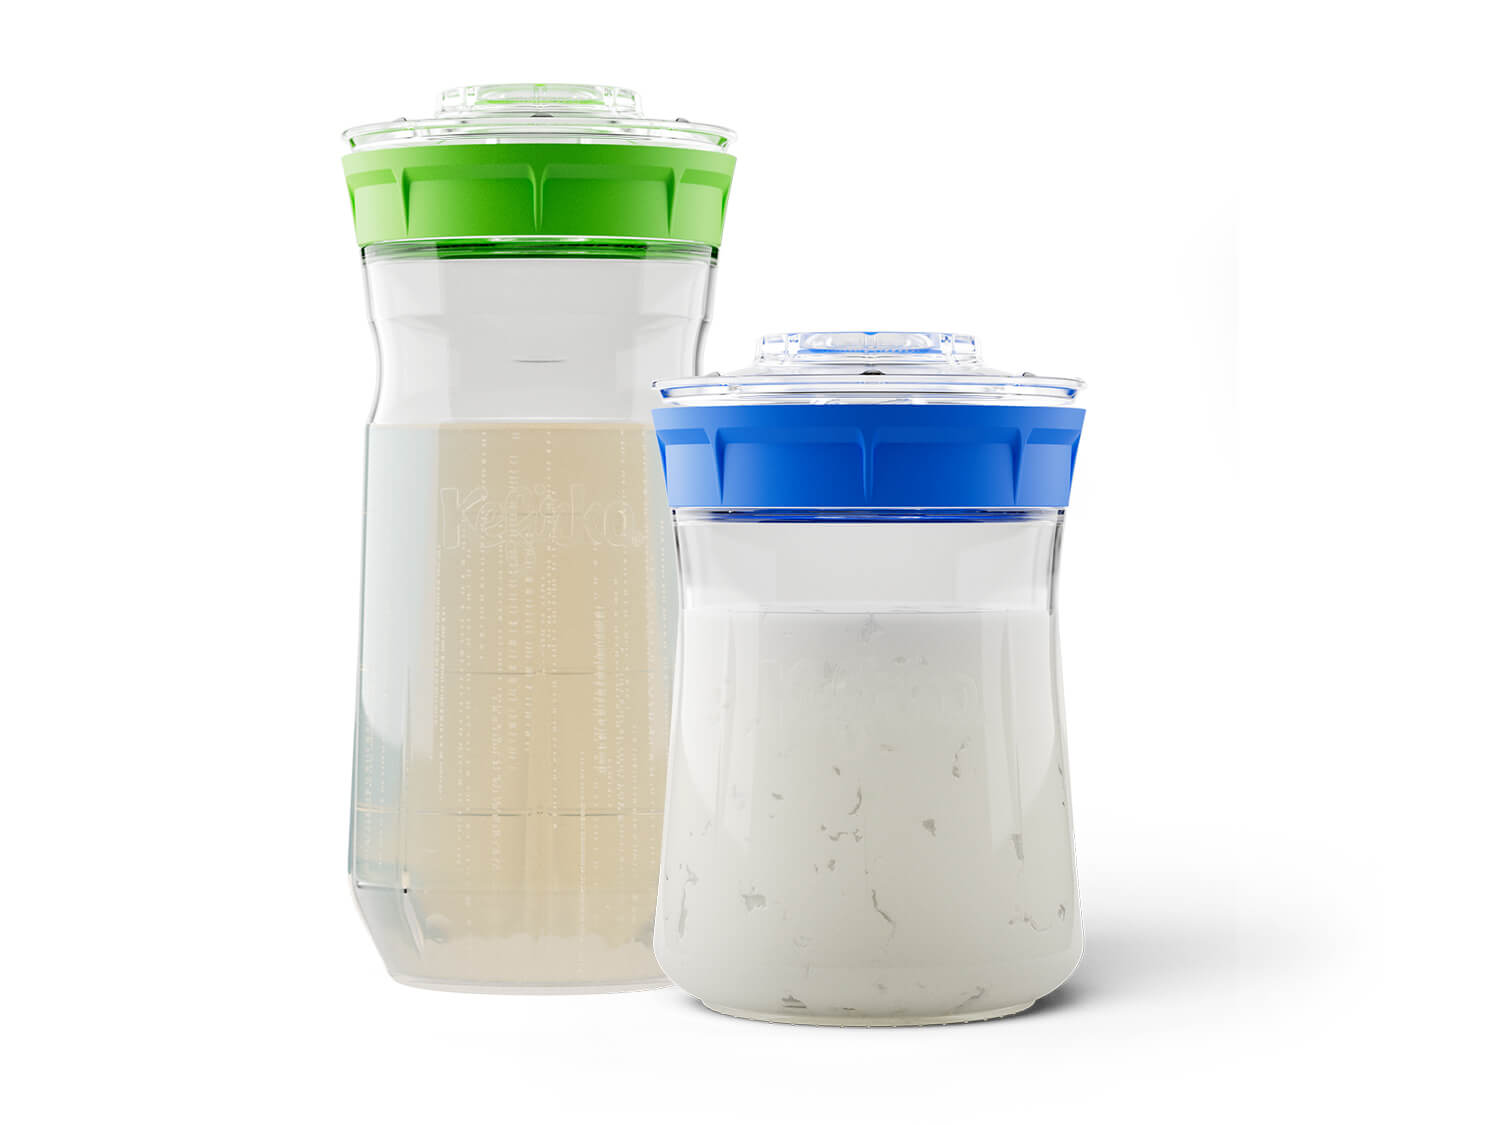 With Kefirko, You Can Brew Probiotic Kefir on Your Kitchen Counter